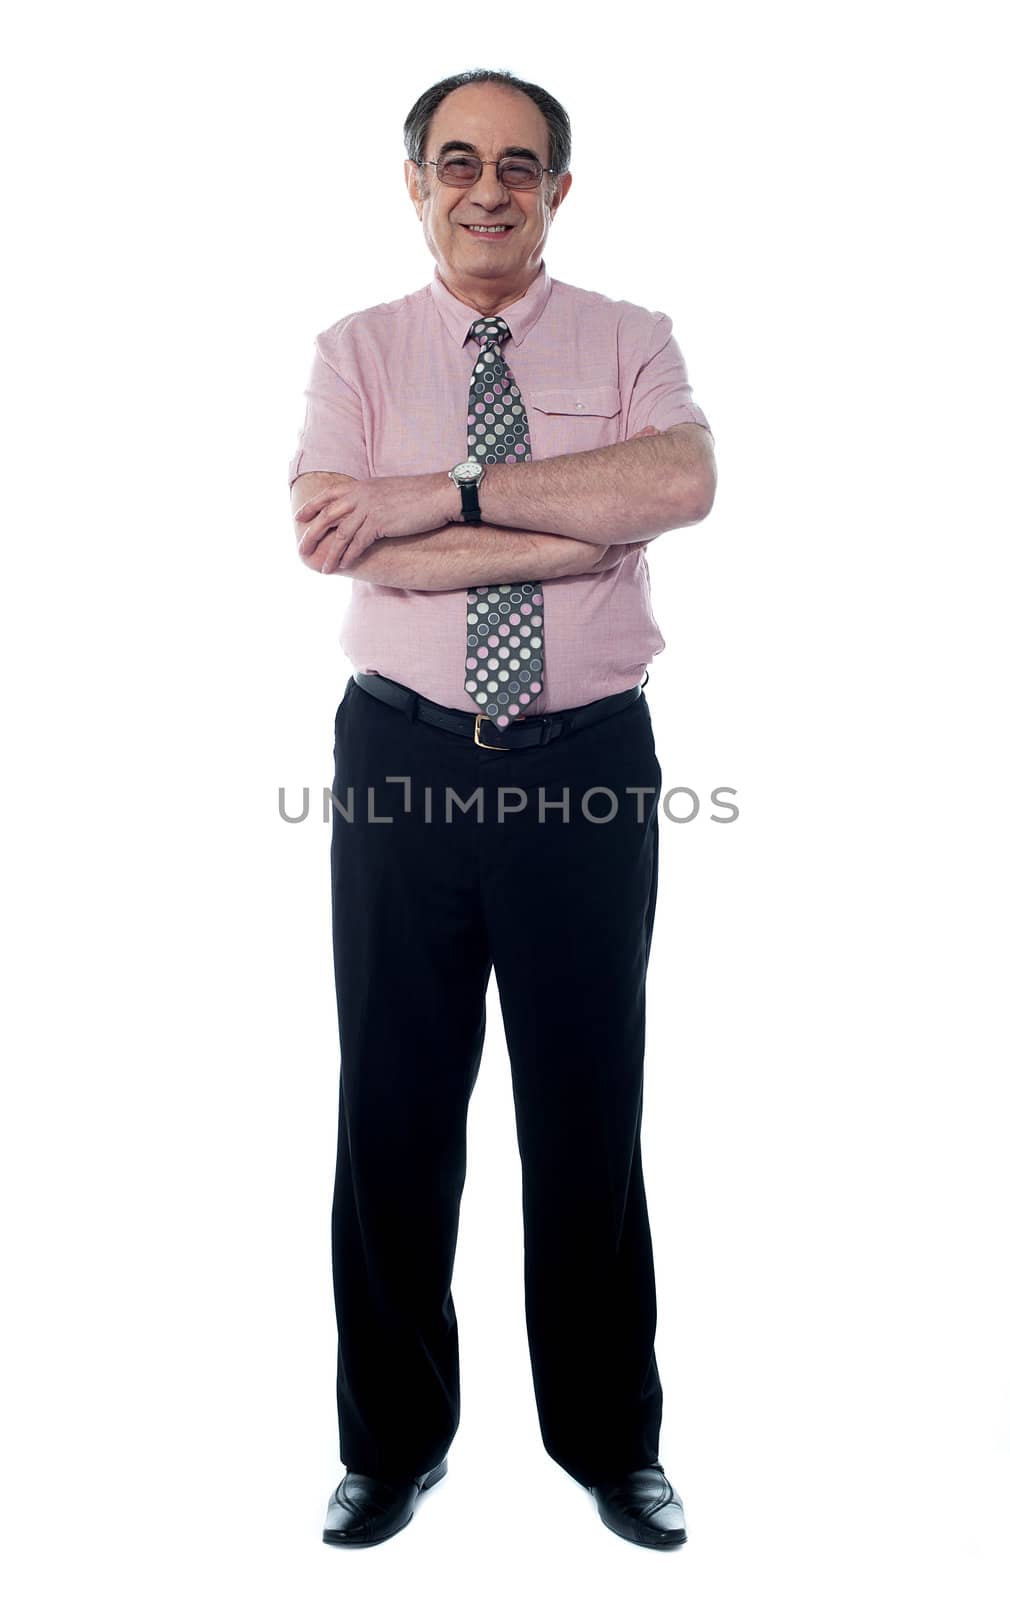 Senior business executive in pink shirt and tie posing with crossed arms isolated on white